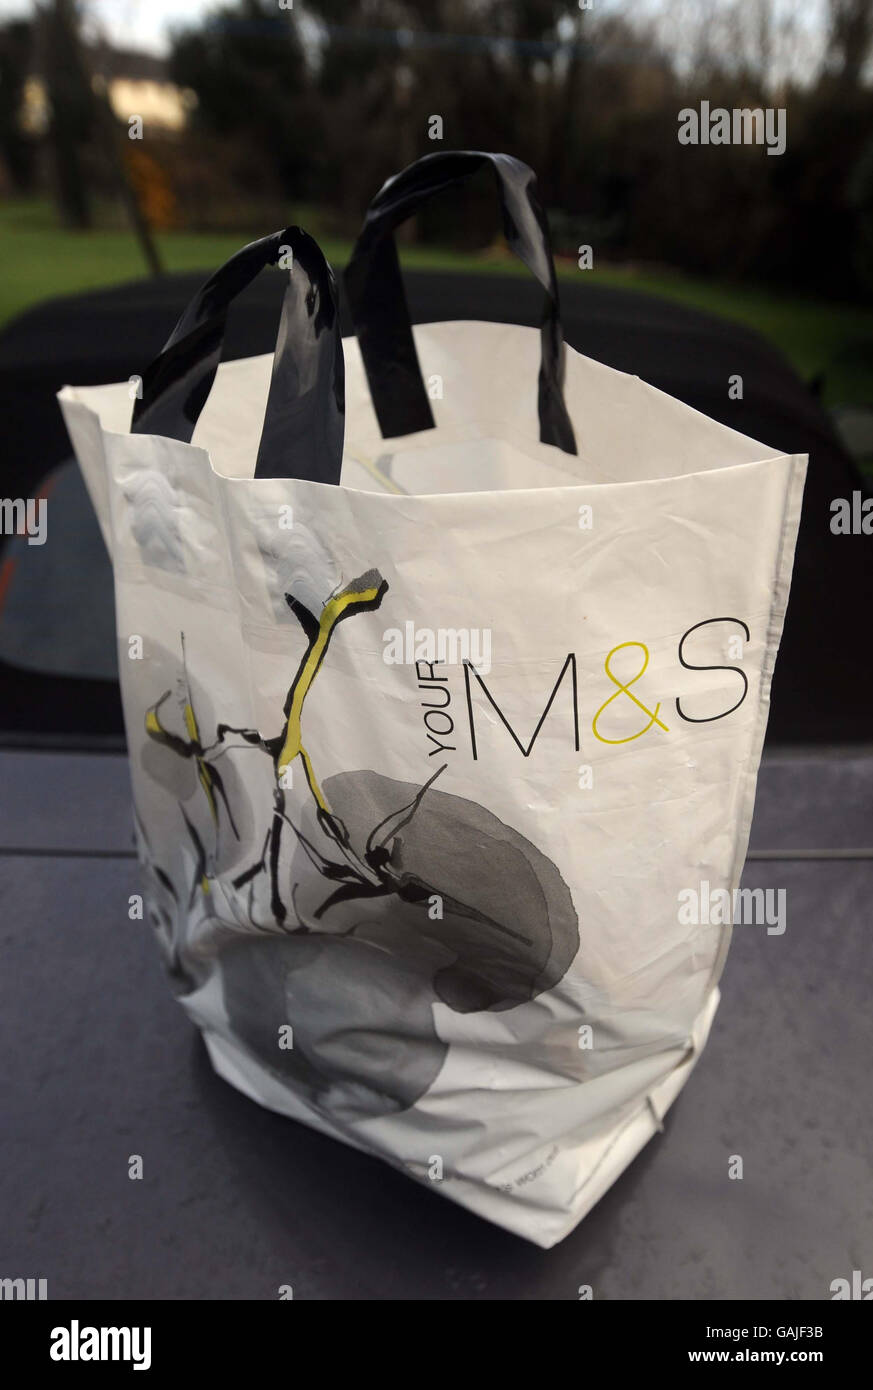 Marks And Spencer Bag Stock Photos & Marks And Spencer Bag Stock Images ...